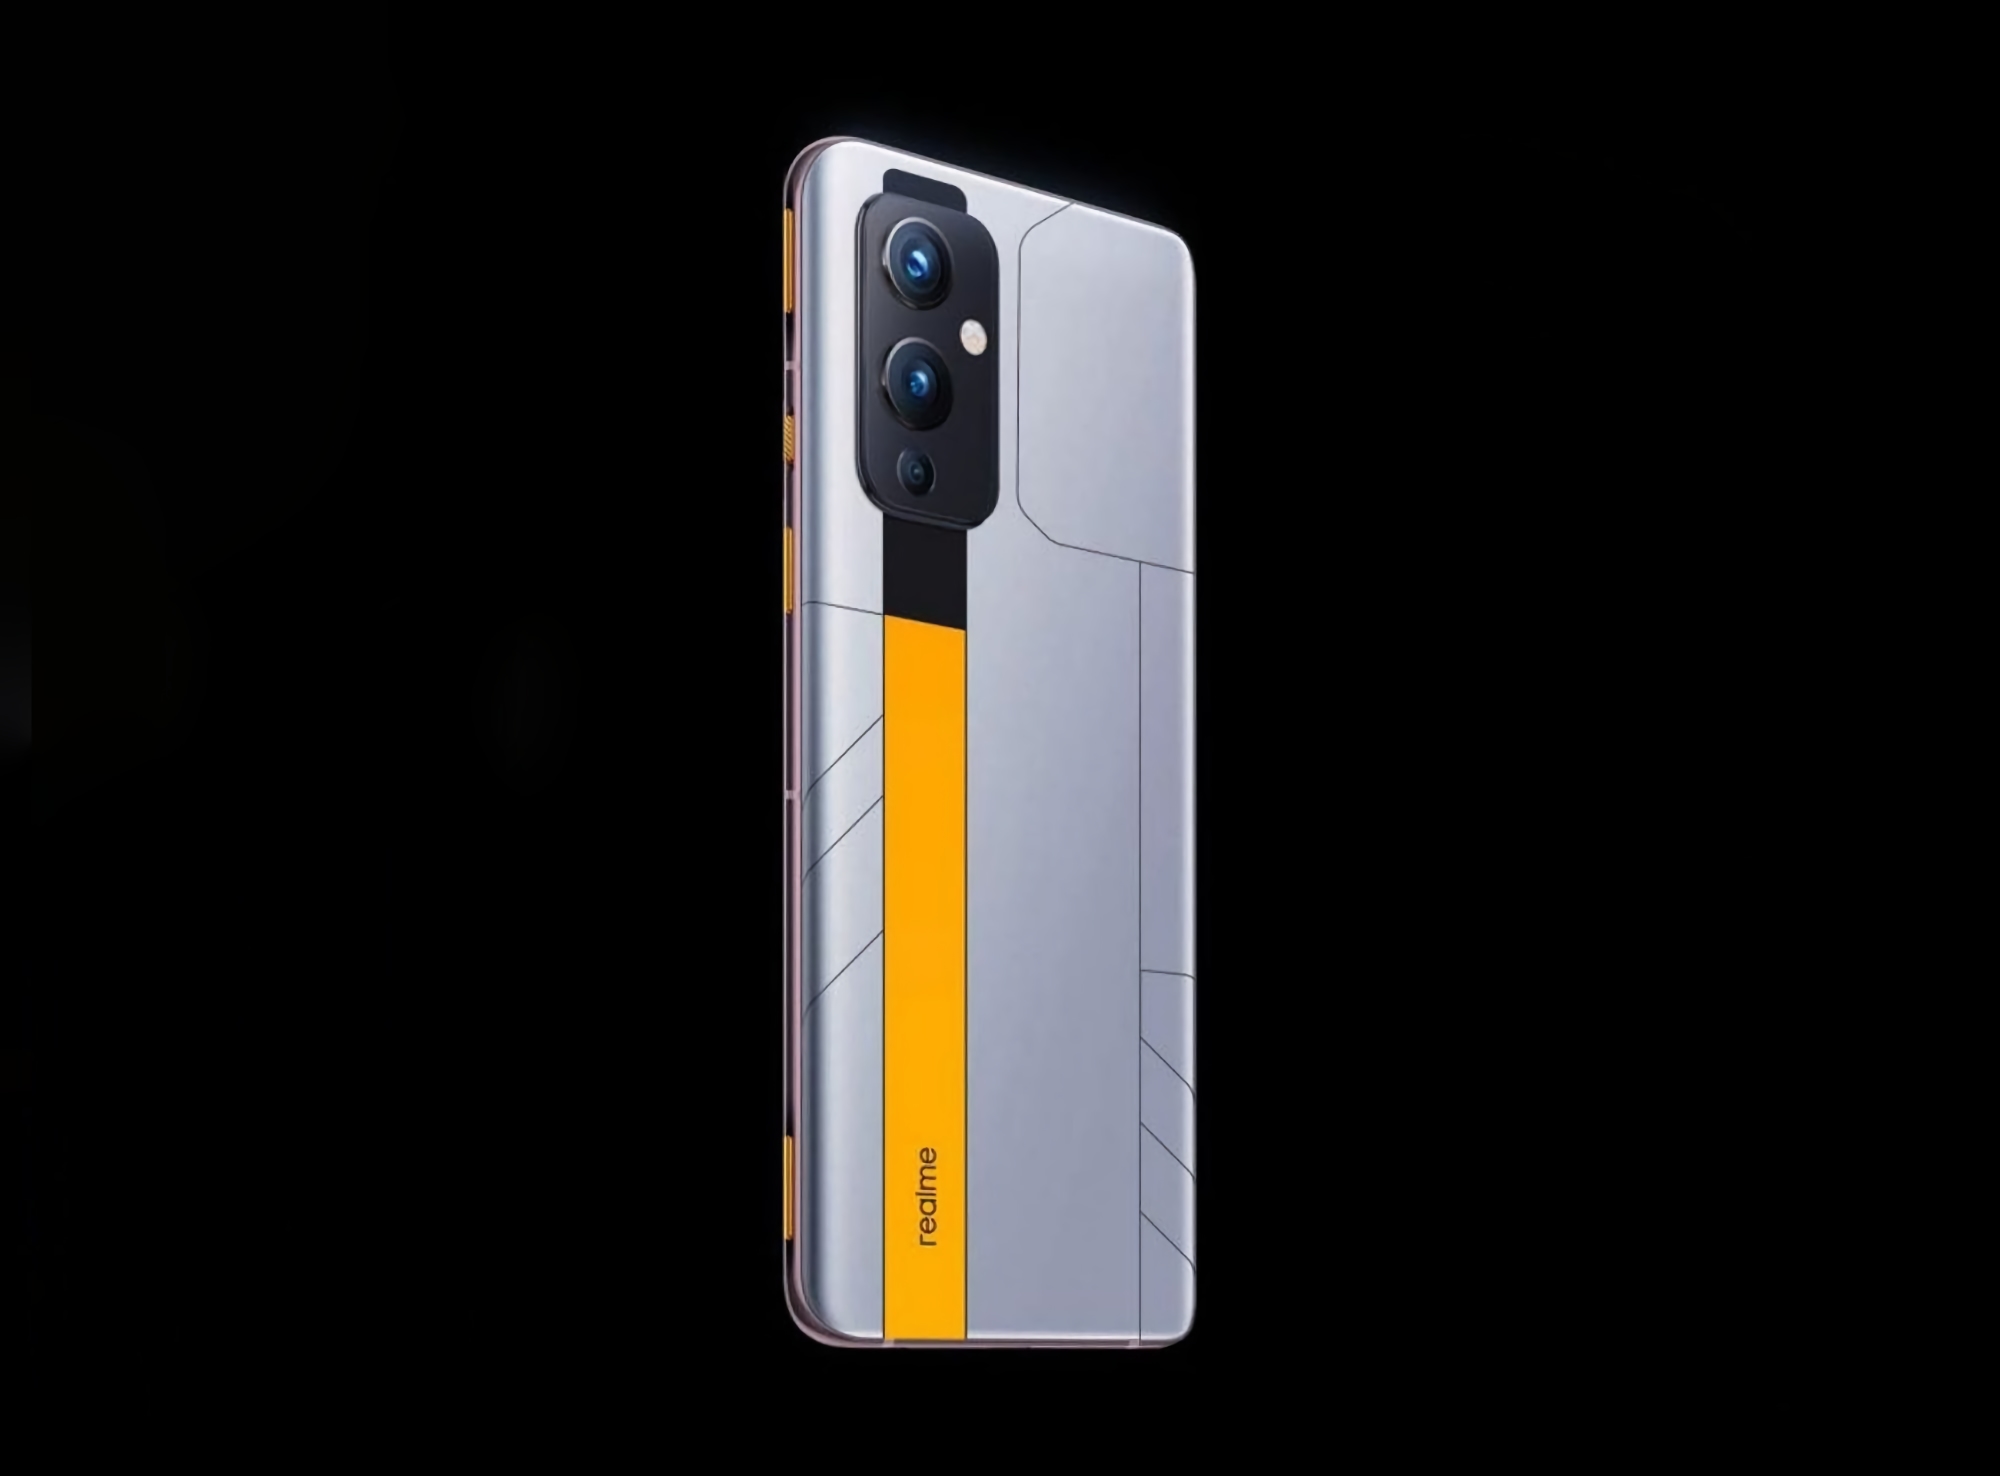 Dimensity 9000 chip, 120W charging and triple camera: details and render of the realme GT Neo 3 smartphone appeared on the network